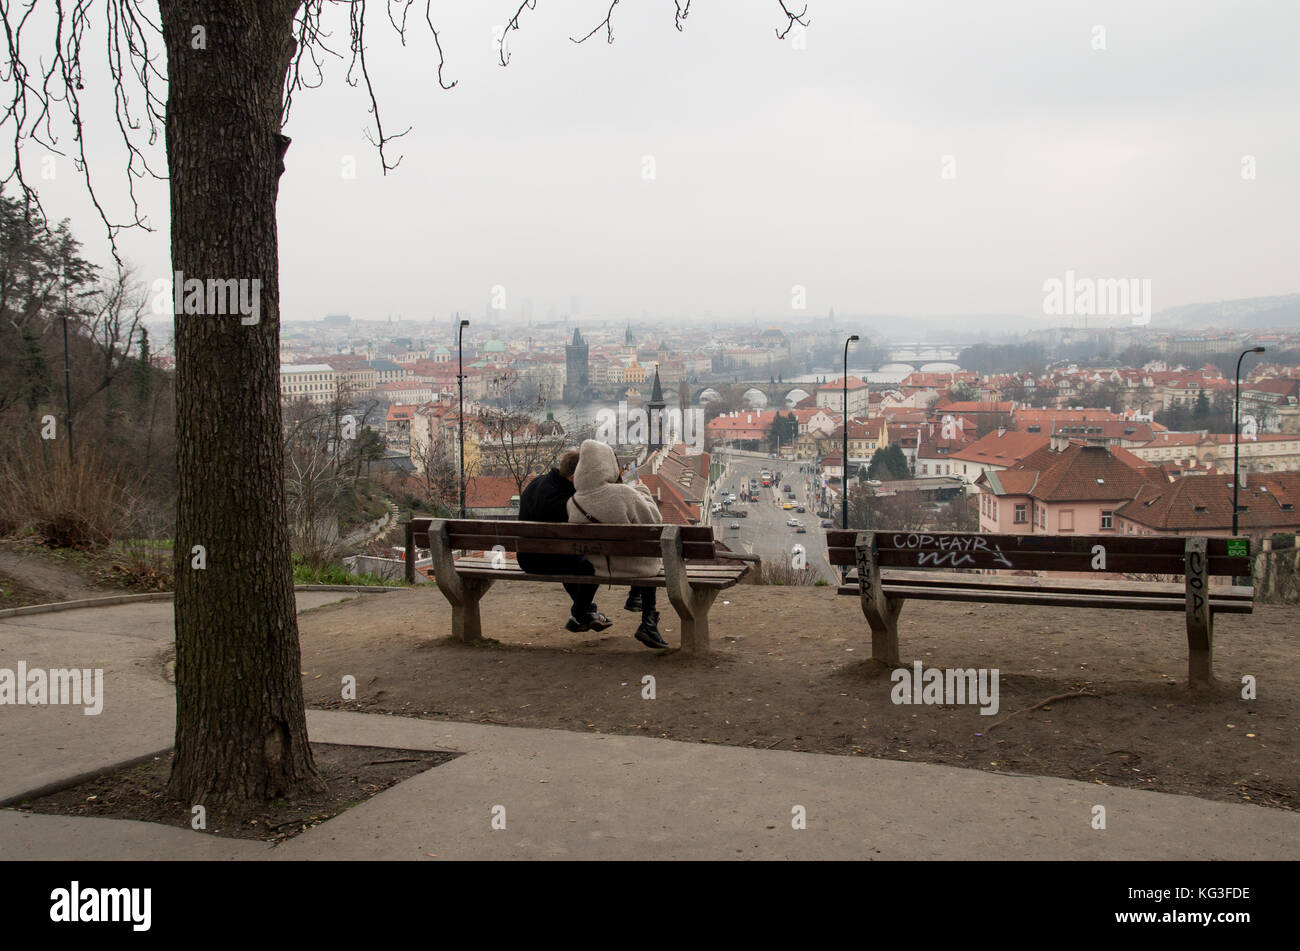 A view of Prague from a hill with benches in the foreground and a couple sitting on one on an overcast day. Stock Photo